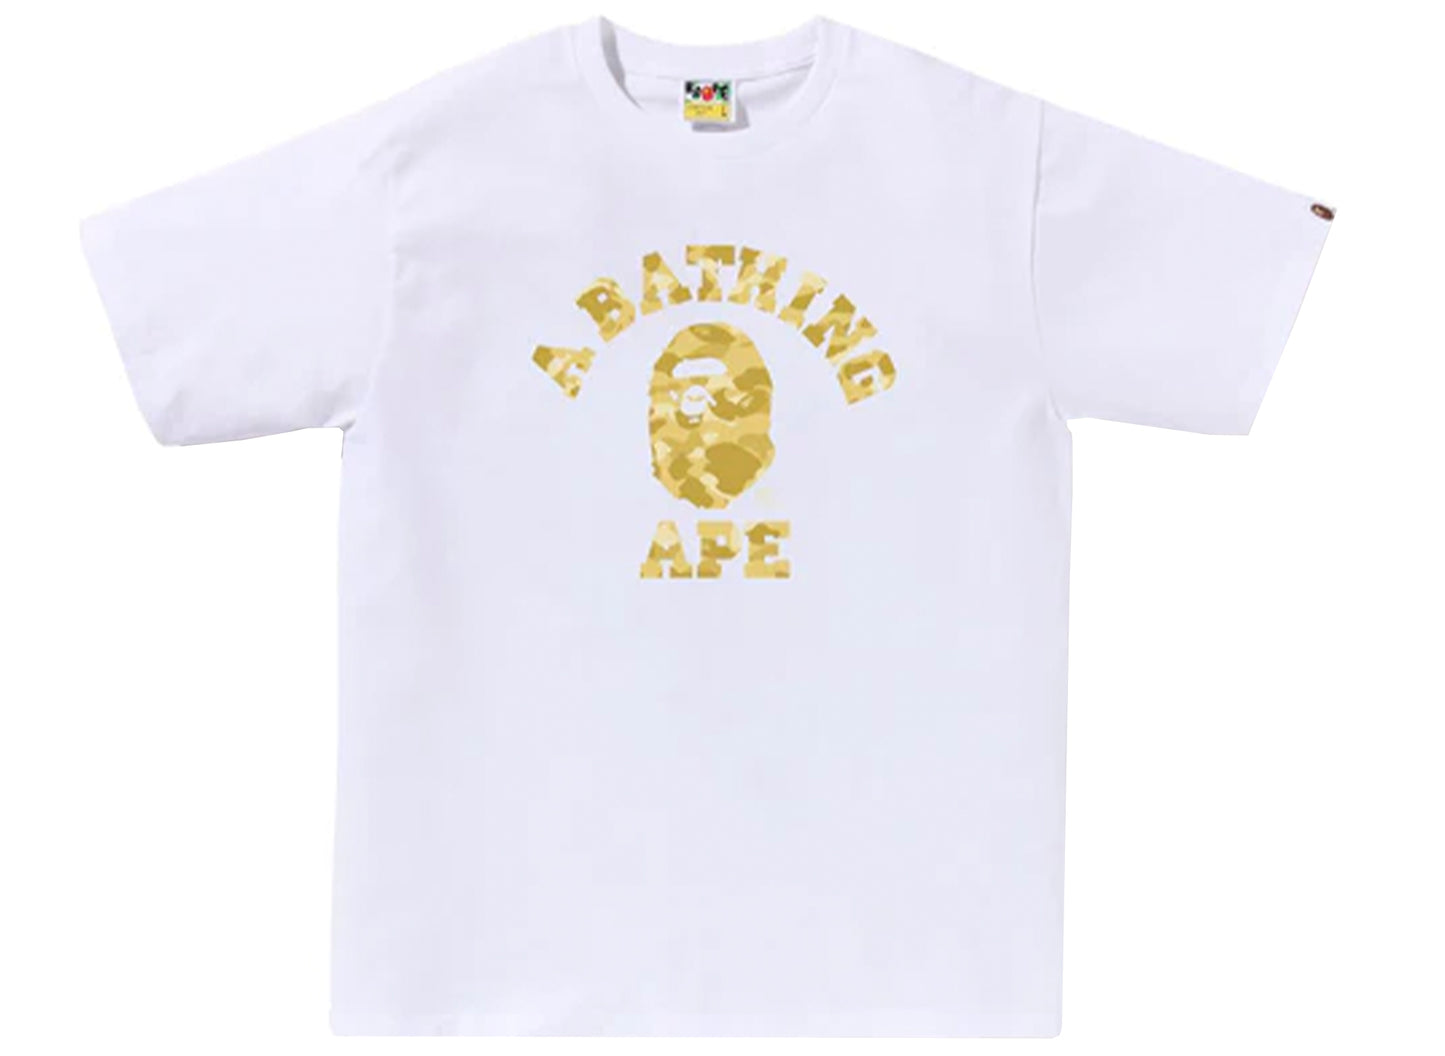 A Bathing Ape Color Camo College Tee in White/Yellow xld